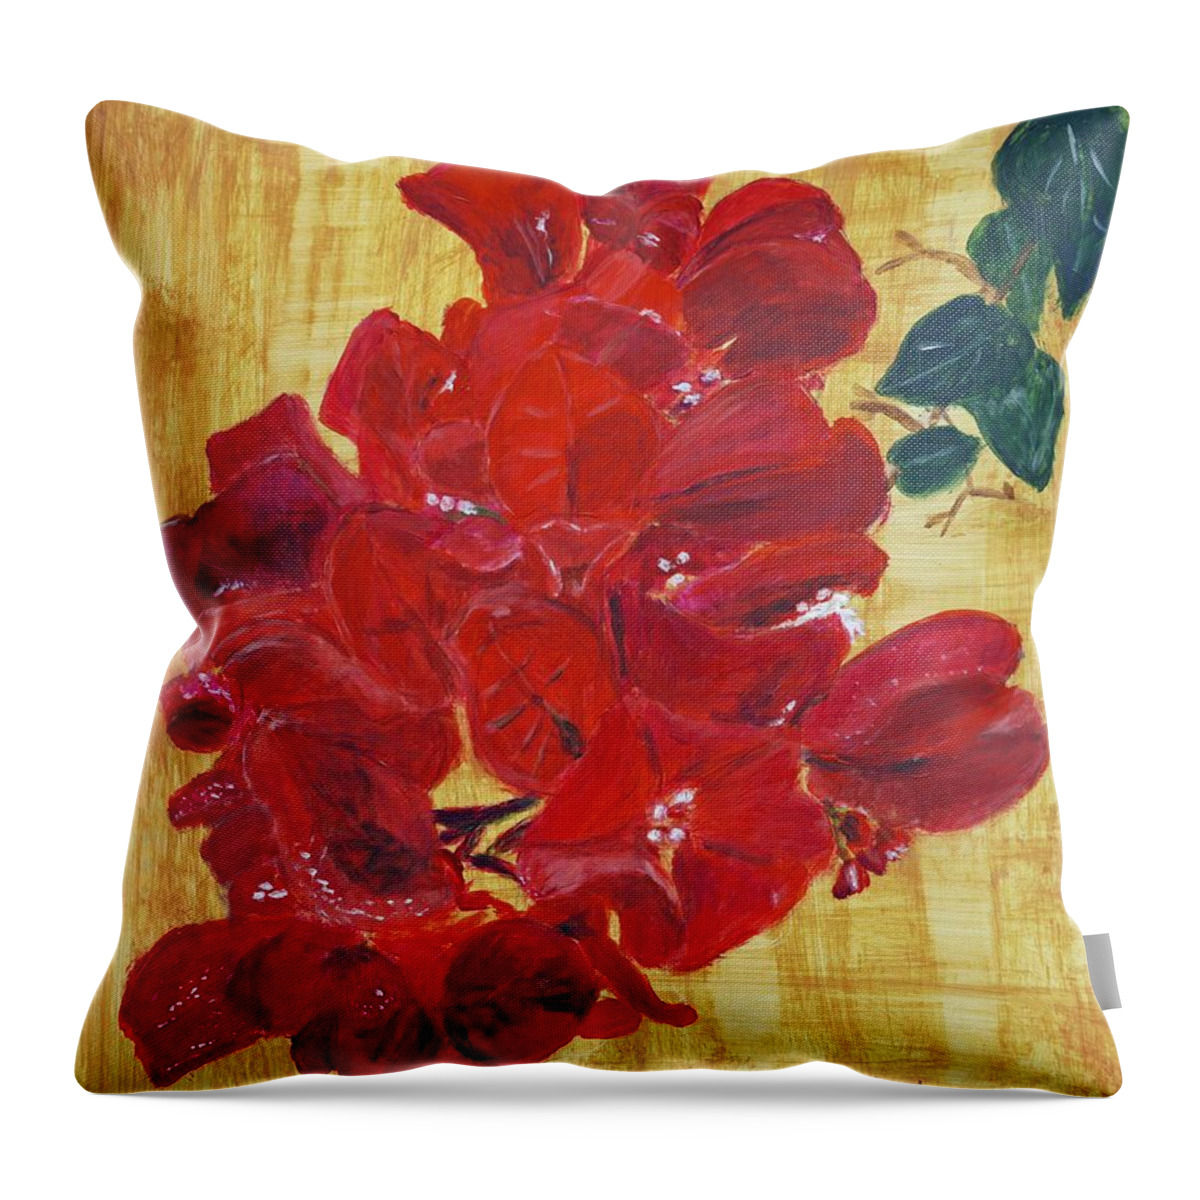 Flowers Throw Pillow featuring the painting Bougainvillea by Linda Feinberg